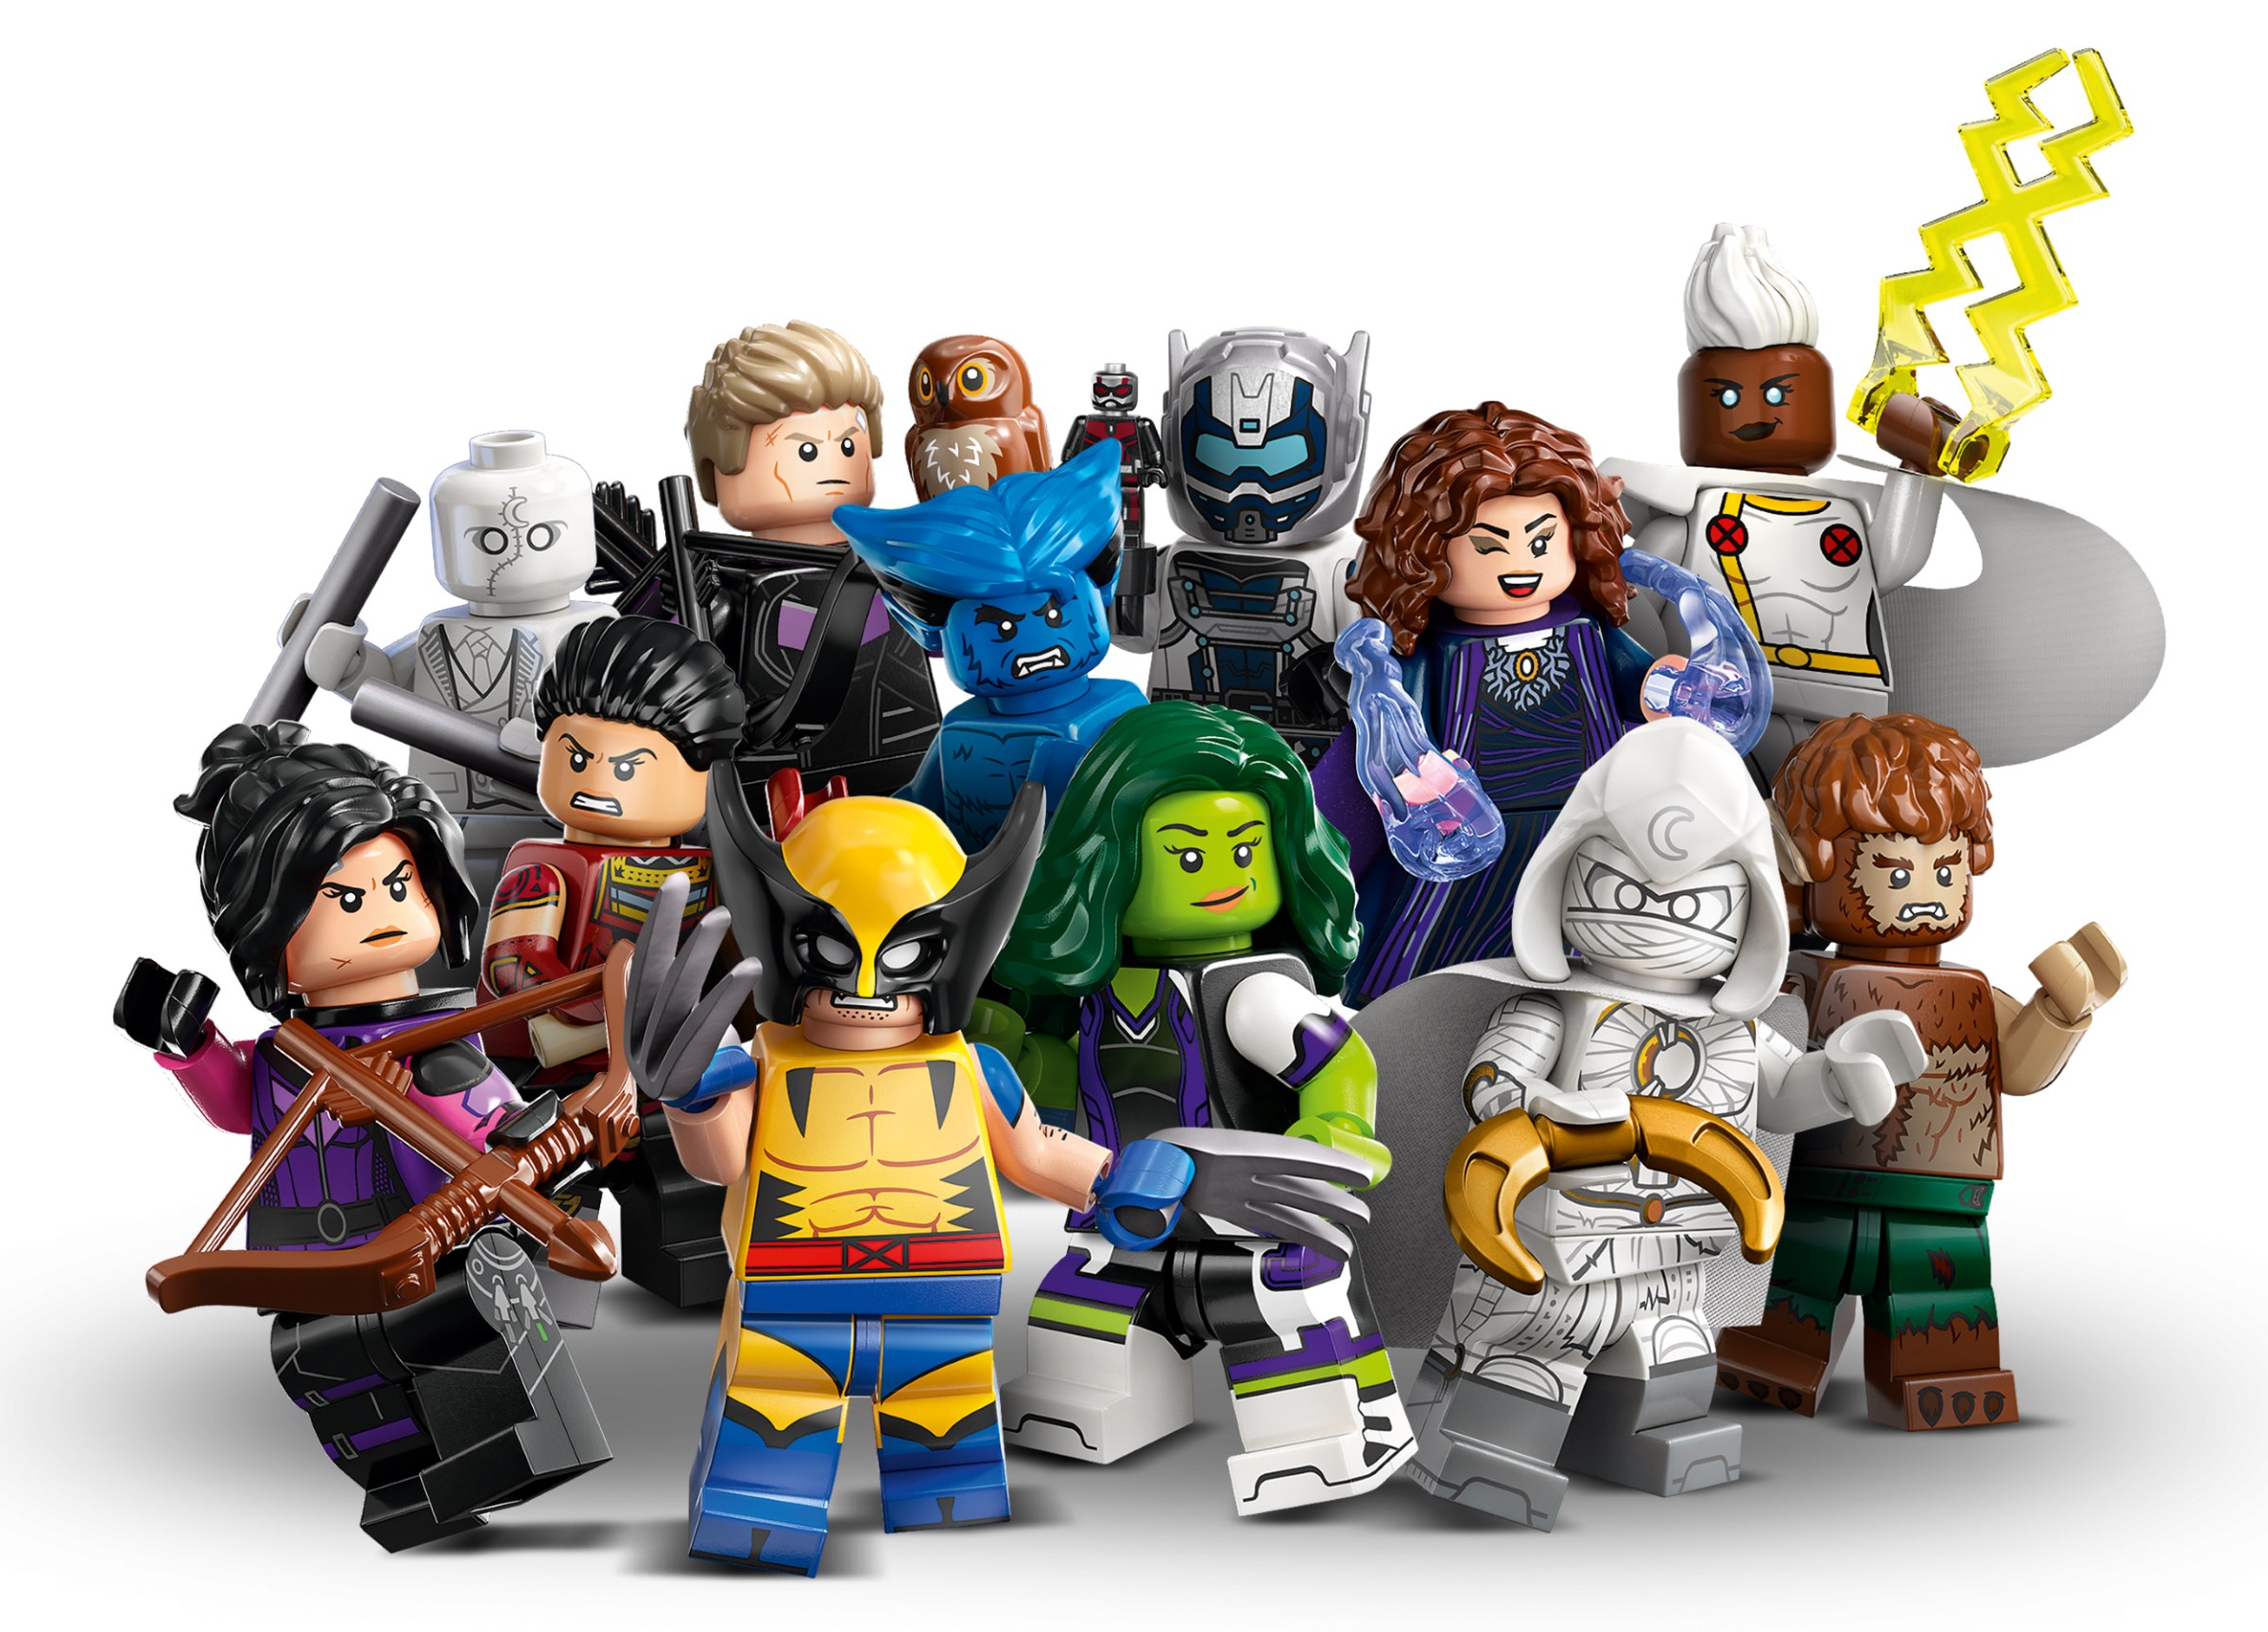 Here are all 20 minifigs from The LEGO Batman Movie Minifigure Series -  Jay's Brick Blog